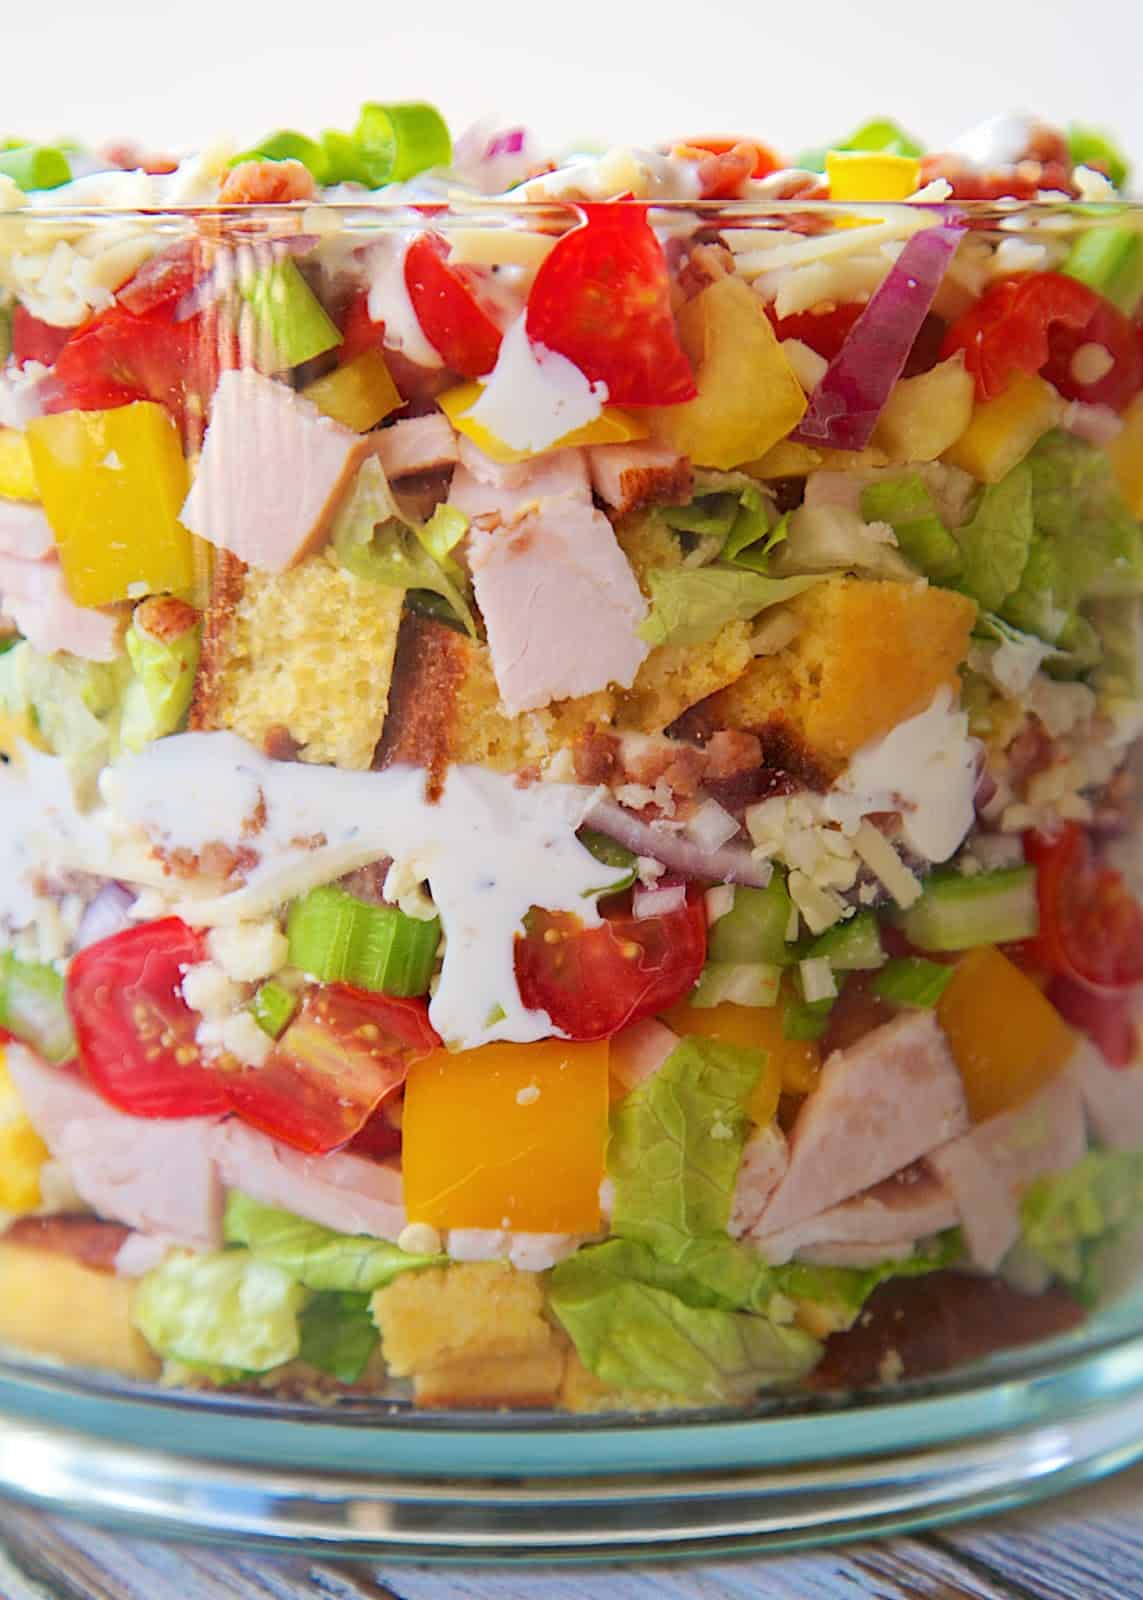 Cornbread & Turkey Layered Salad Recipe - loaded with cornbread, turkey, cheese, vegetables and bacon! It is a whole meal in one big bowl! Make ahead of time and refrigerate before serving. Can be made 24 hours in advance. Perfect for brunch/lunch.